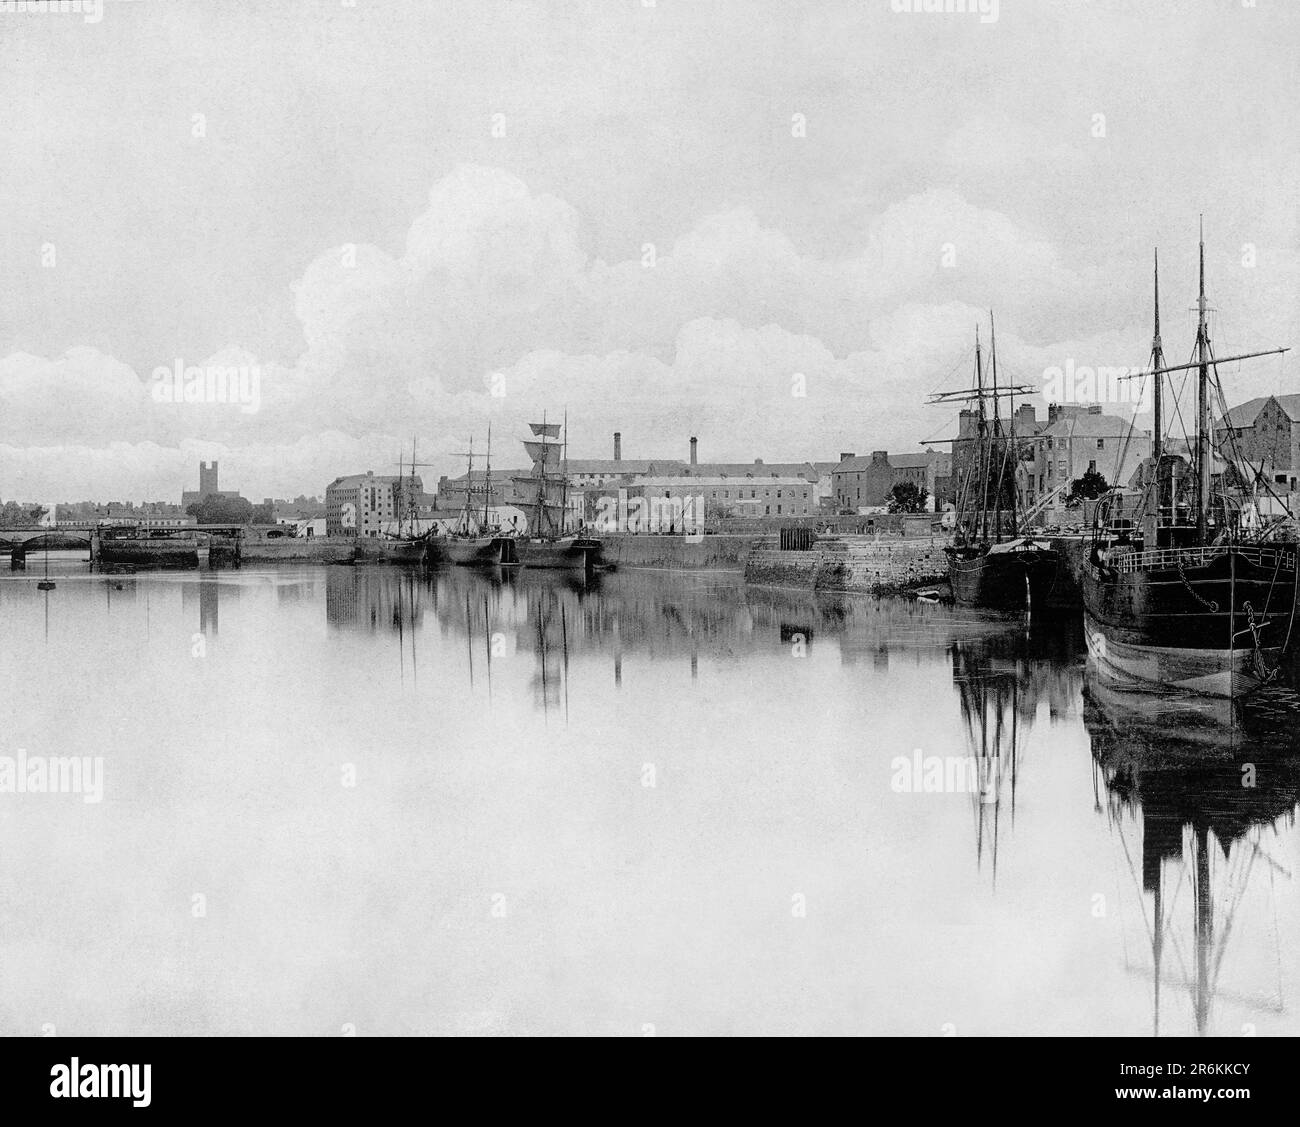 A late 19th century view of shipping moored against the quays on the River Shannon as it flows through Limerick city in County Limerick on the west caost of Ireland. In the late 18th century, Limerick Port established itself as one of Ireland's major commercial ports exporting agricultural produce from one of Ireland's most fertile areas, the Golden Vale, to Britain and America. Stock Photo